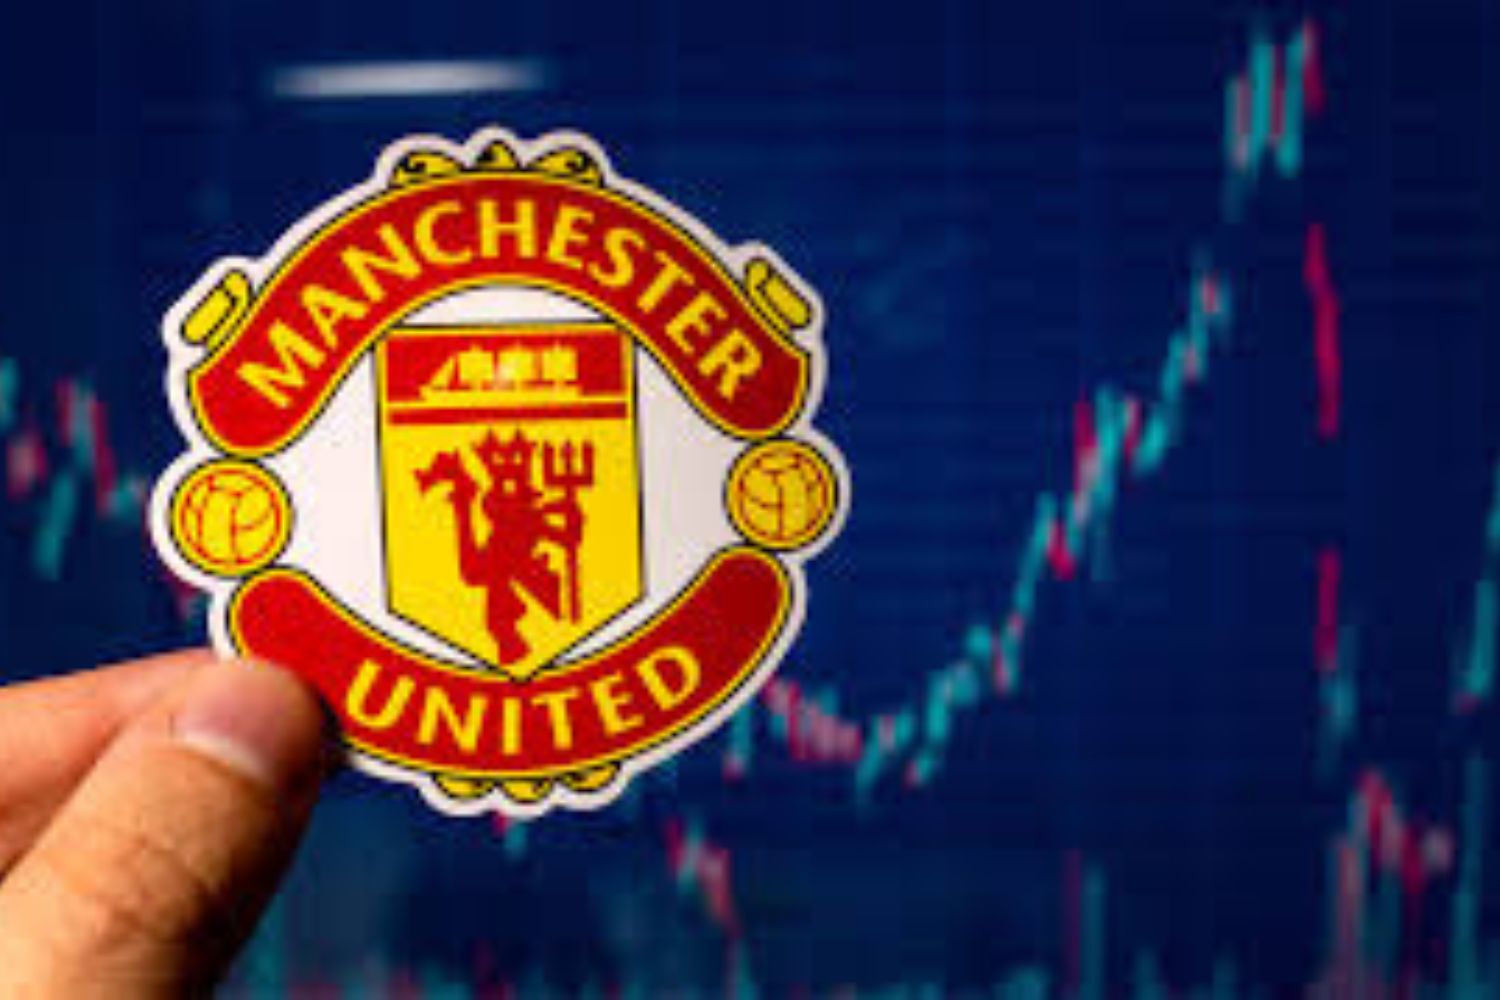 Man United stock rises after a rumoured takeover